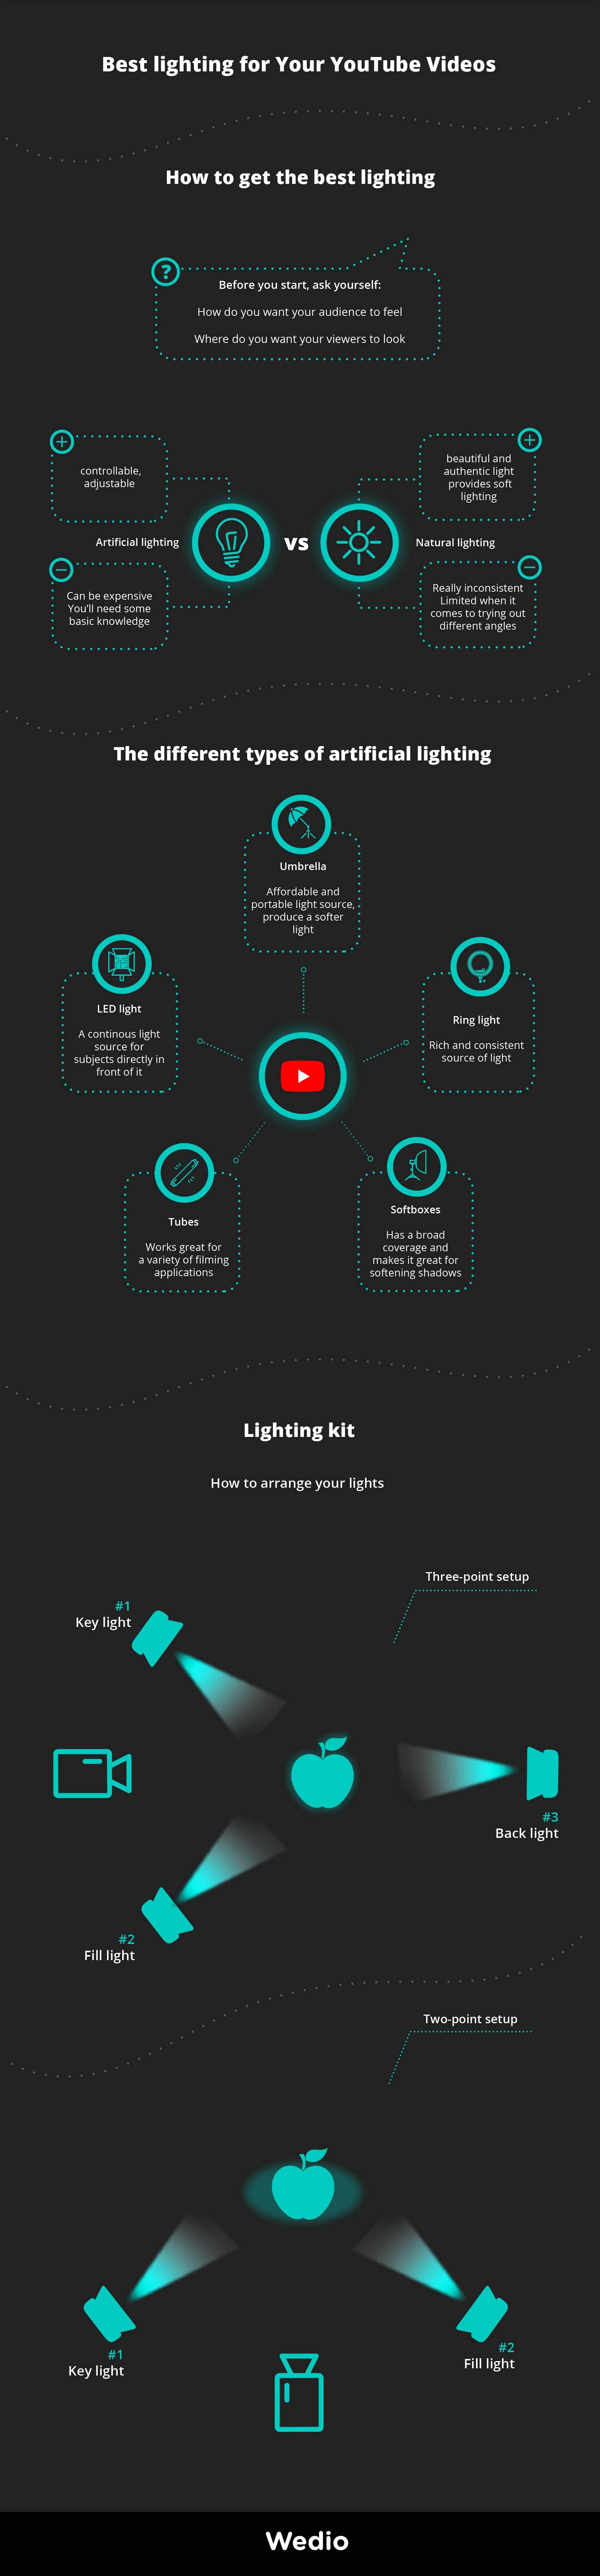 summary in infographic: how to get the best lighting for YouTube, what is natural lighting, why is natural lighting good, the different types of lighting, 